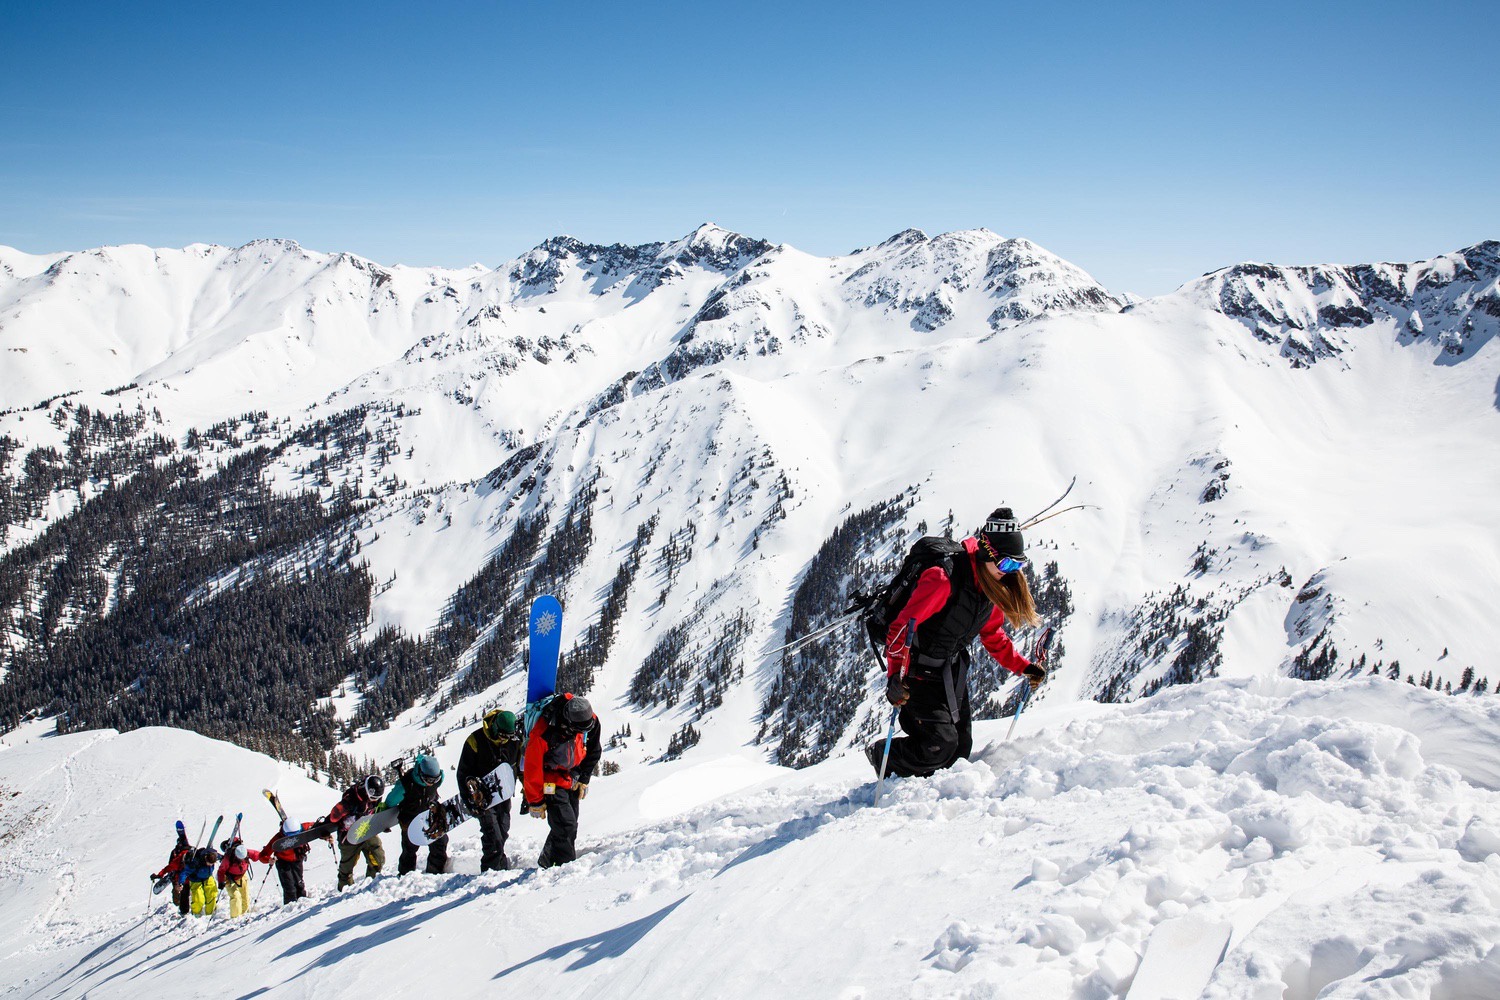 Some shredders earning their turns (hiking) in Silverton Mountain